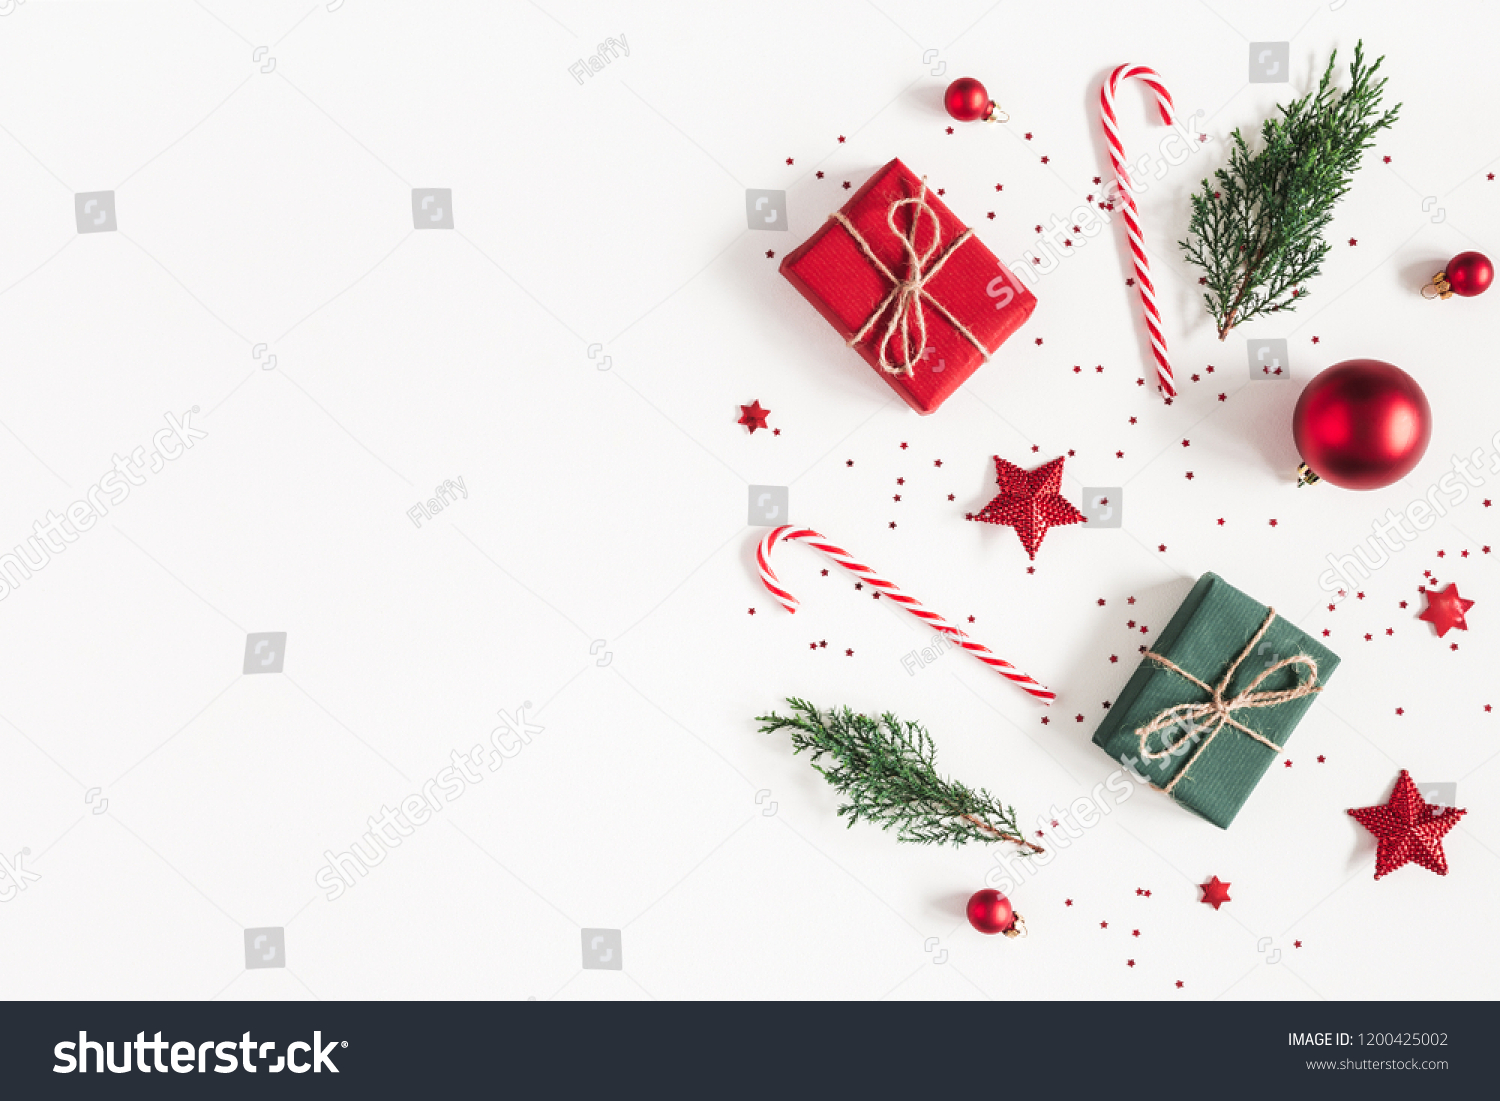 Christmas composition. Gifts, fir tree branches, red decorations on white background. Christmas, winter, new year concept. Flat lay, top view, copy space #1200425002